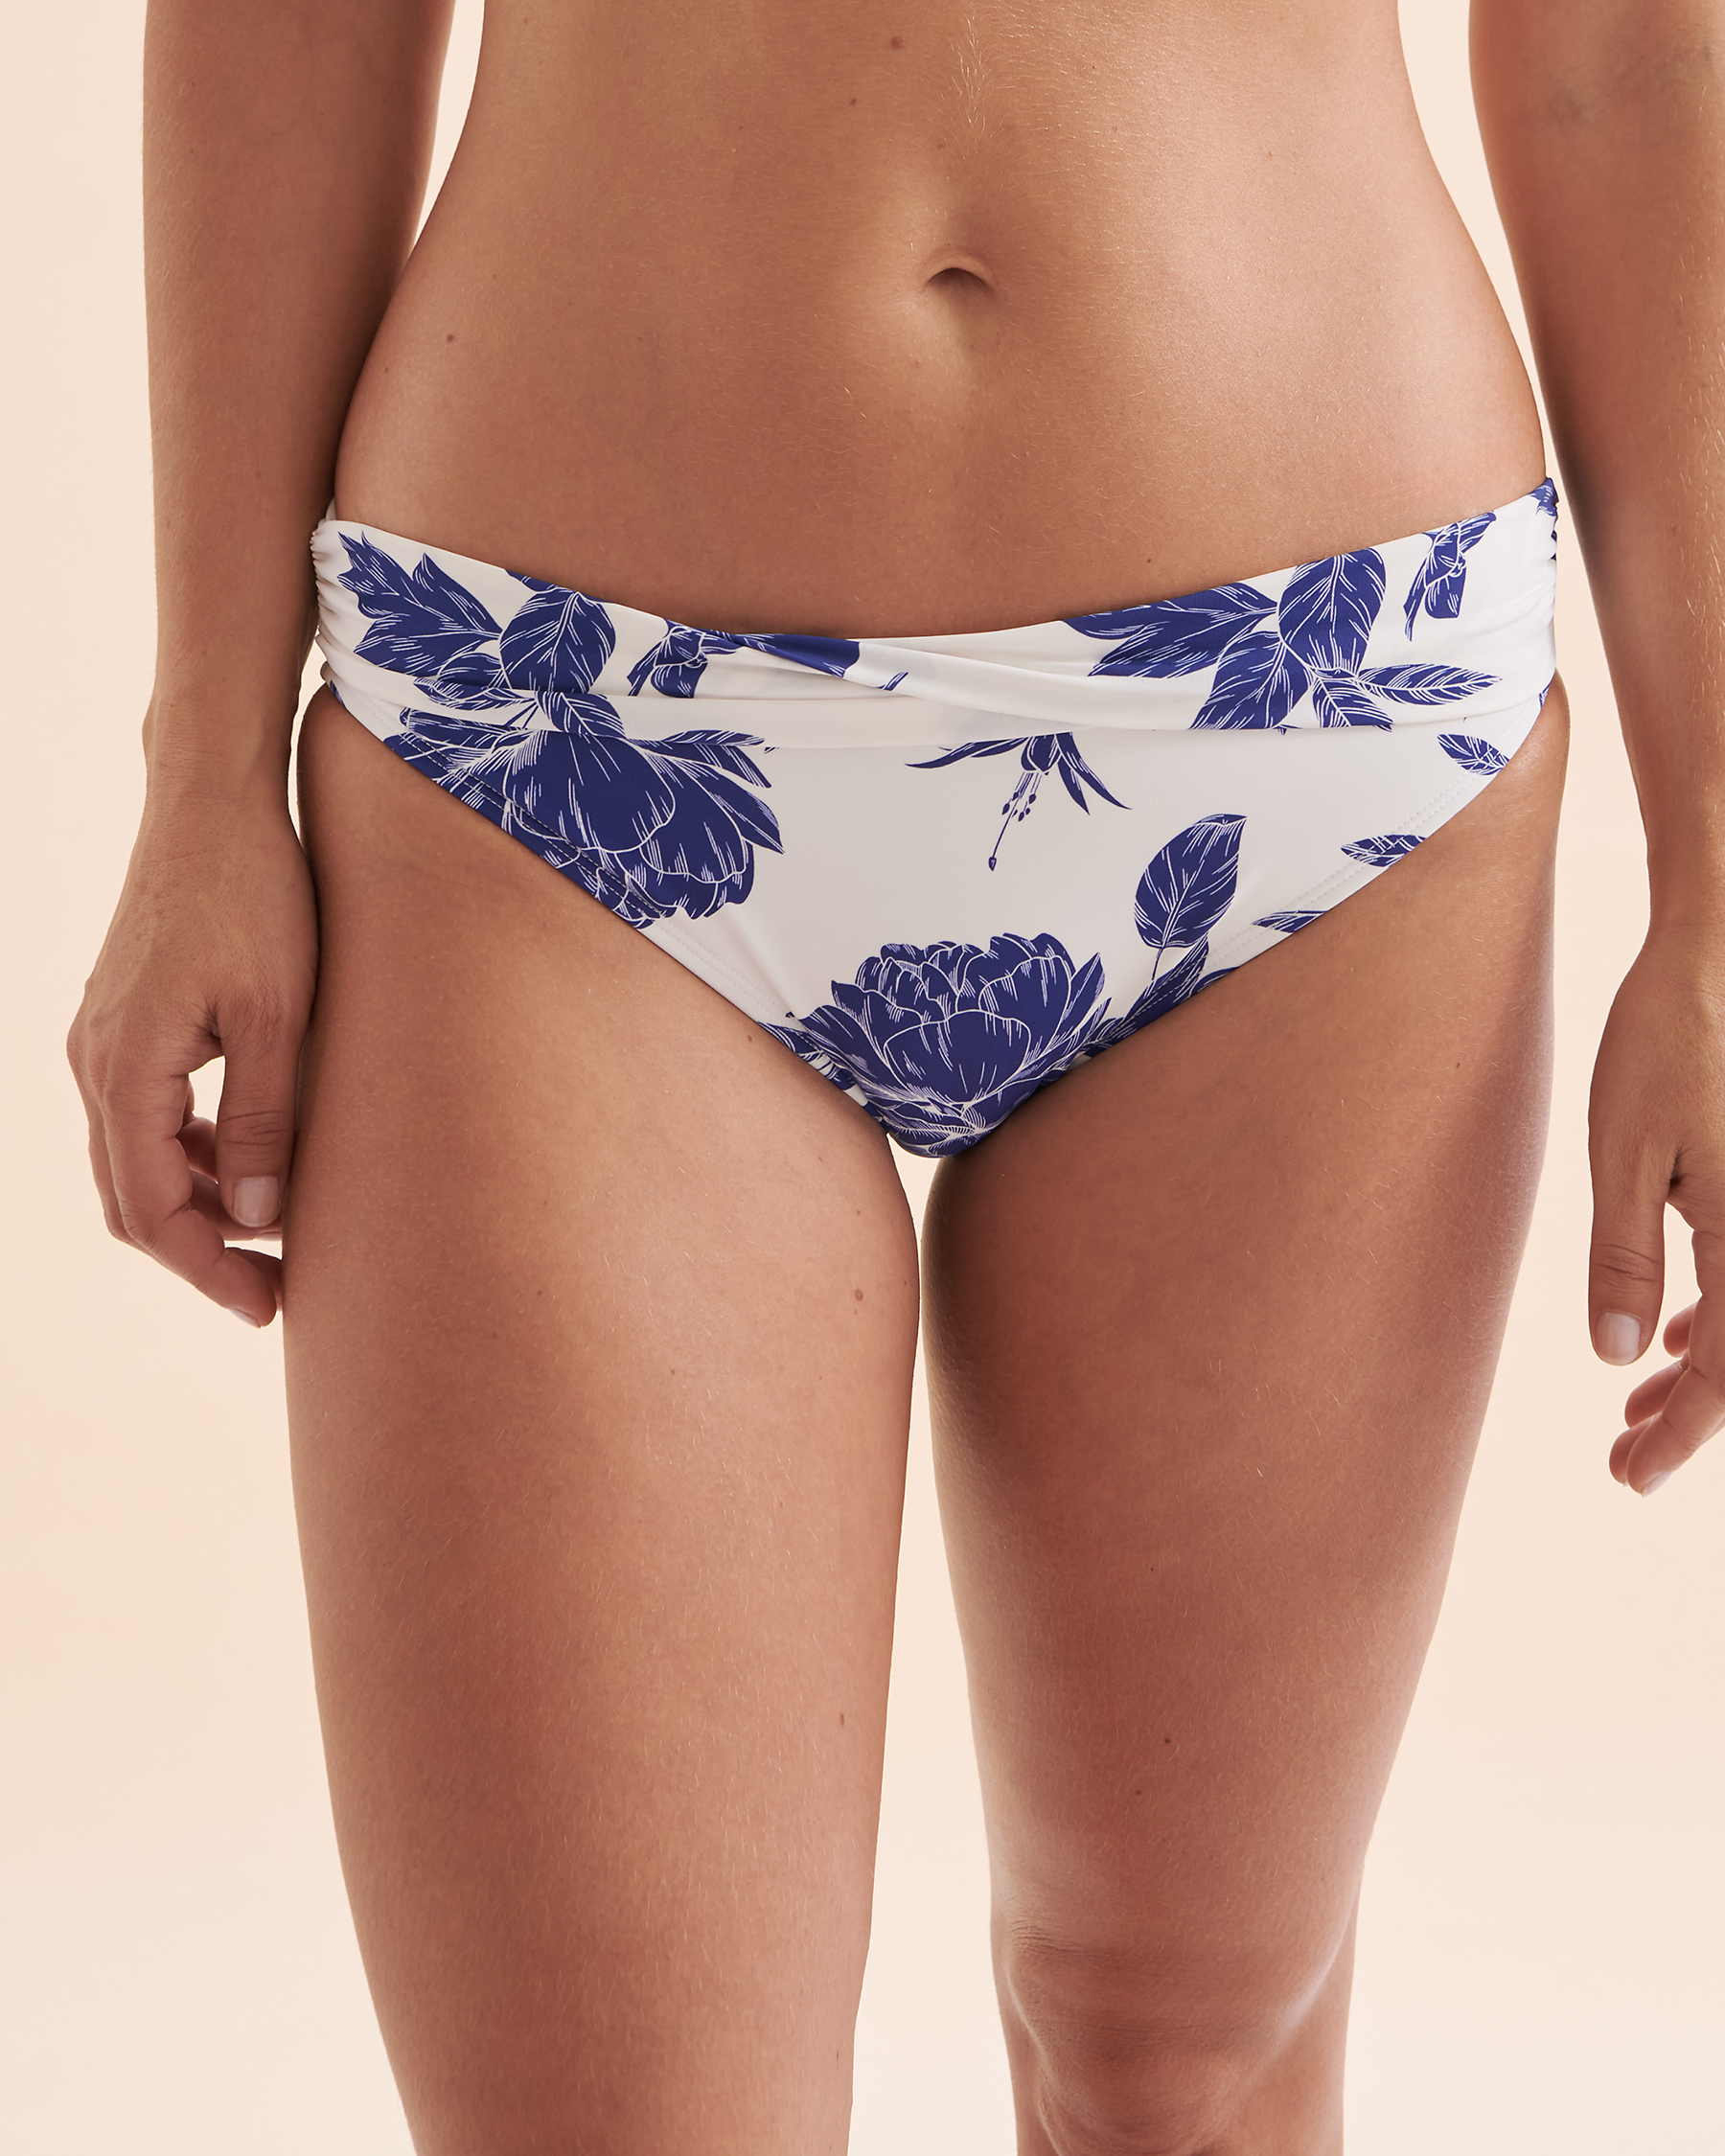 TURQUOISE COUTURE Floral Folded Waistband Bikini Bottom White & Blue Floral 01300271 - View5